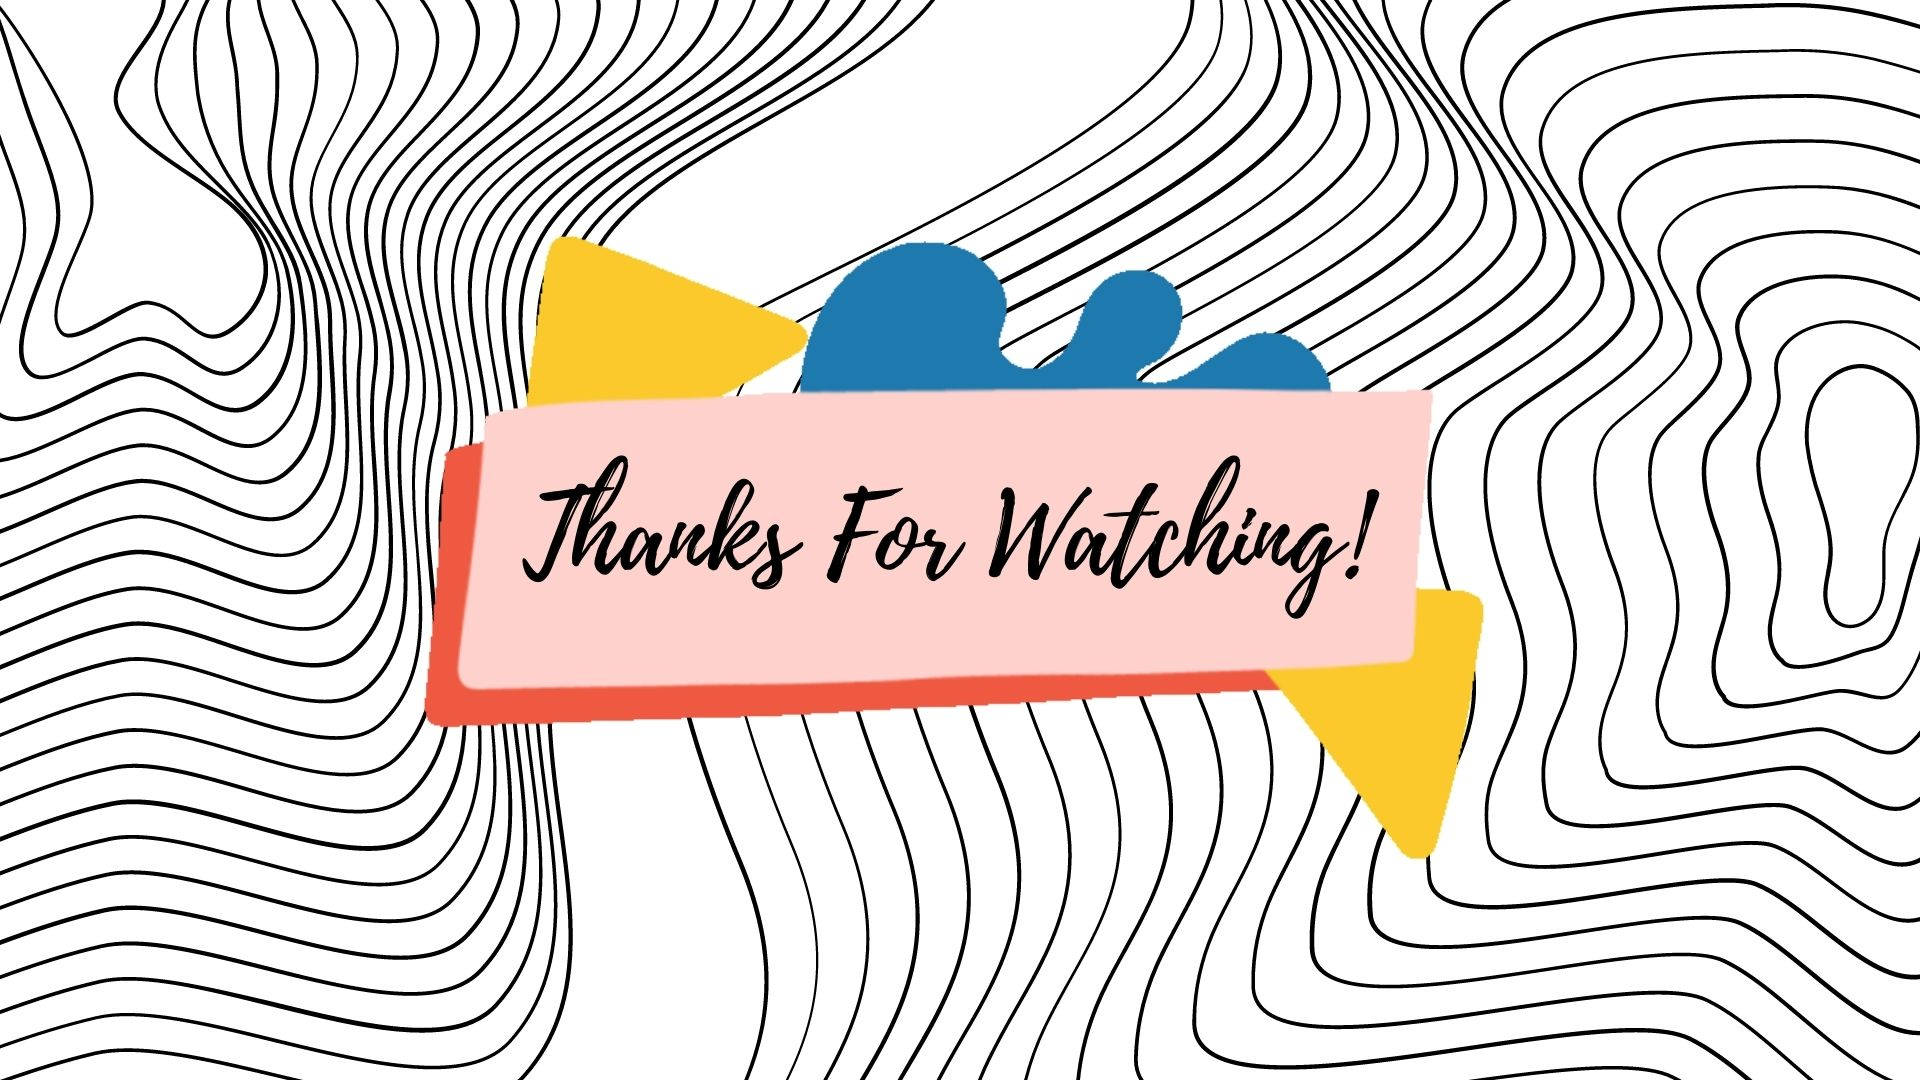 Thanks For Watching Card Geometric Design Wallpaper